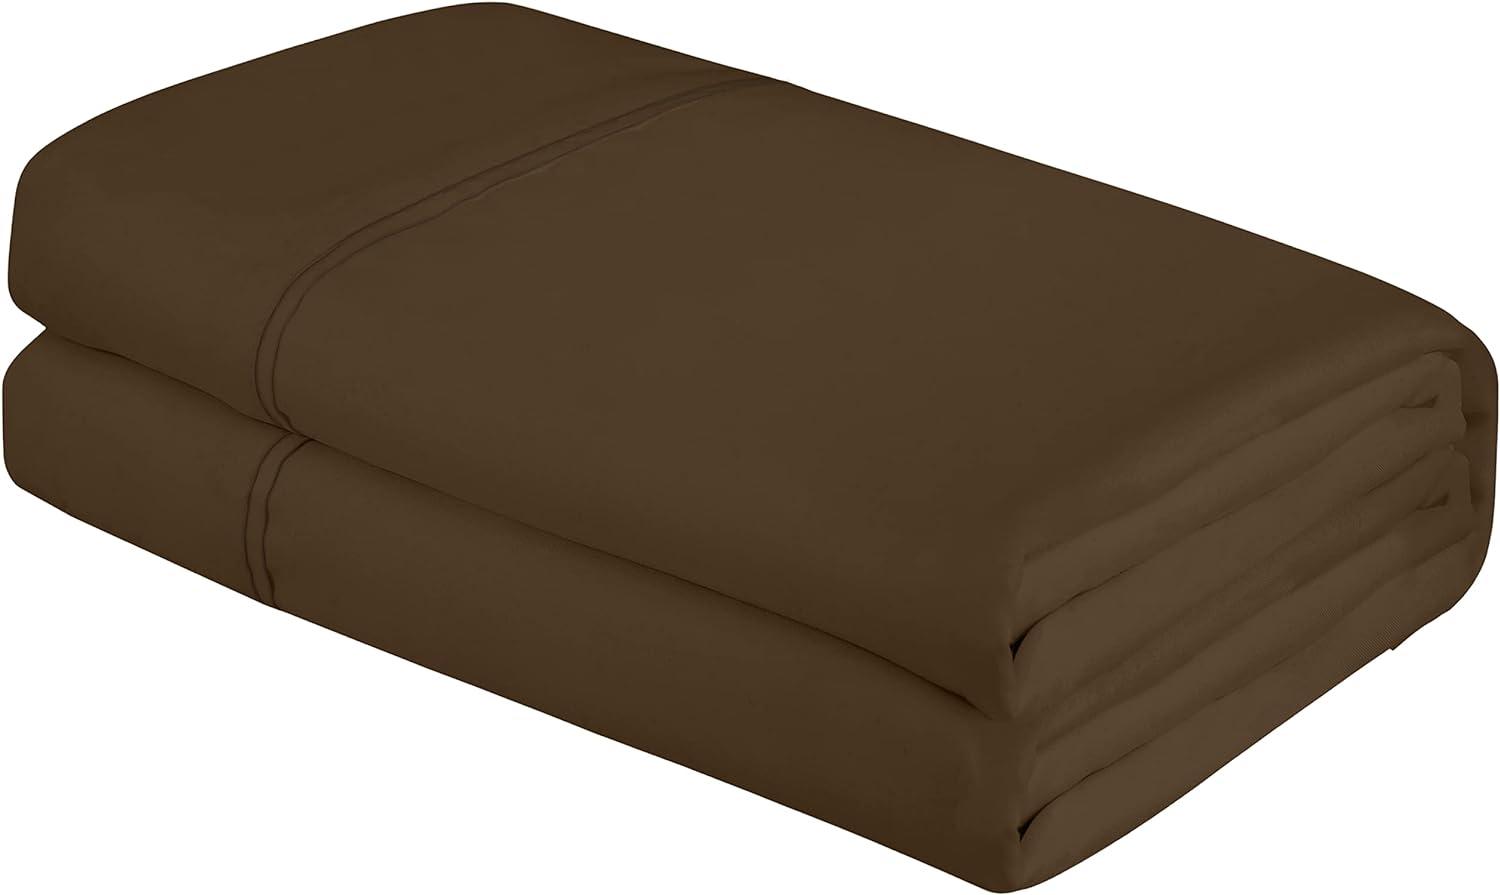 Royale Linens Queen Size Flat Sheet Only - Brushed 1800 Microfiber - Ultra Soft & Breathable - Wrinkle Resistant - Hotel Quality Flat Sheet Sold Separately - Top Sheet for Bed (Queen, Chocolate)